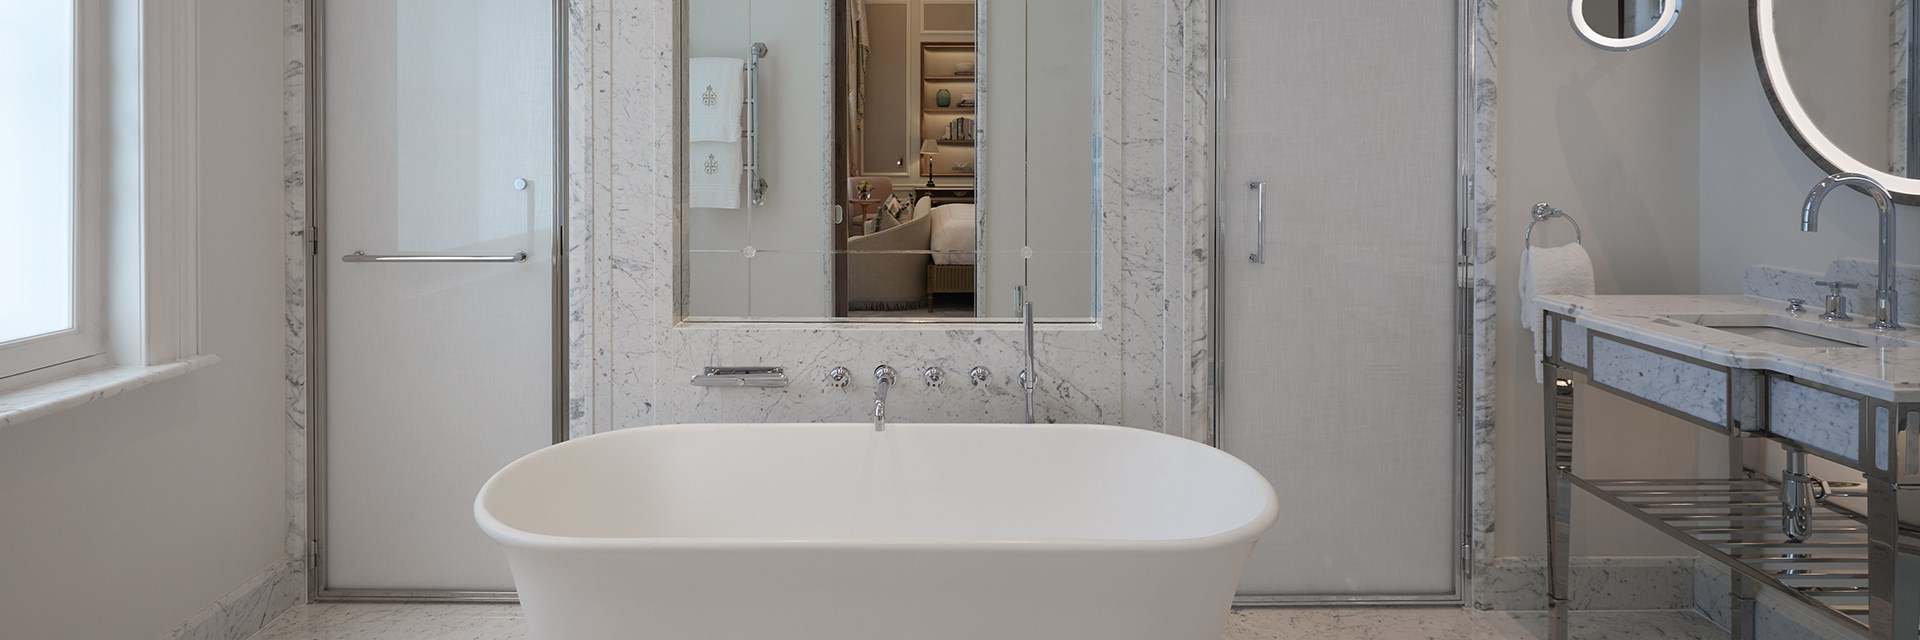 The bathroom of the Georgian Suite with the bathtub and mirror on the wall